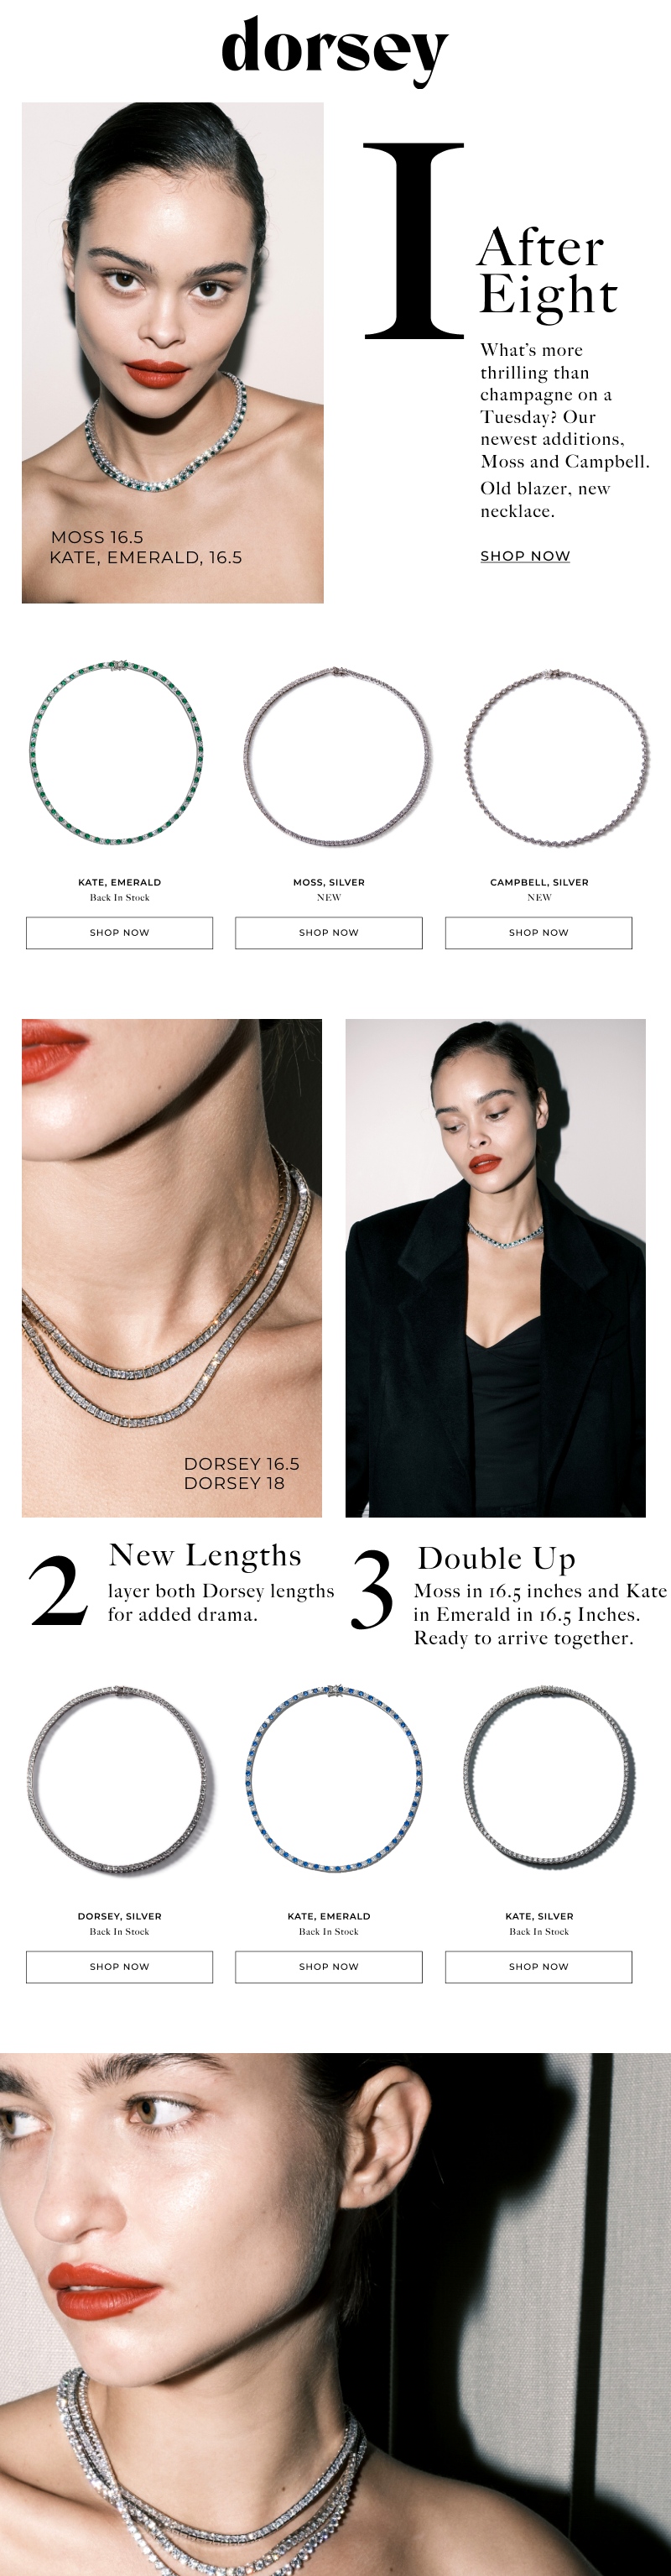 Celeb-loved jewelry brand Dorsey drops spring collection